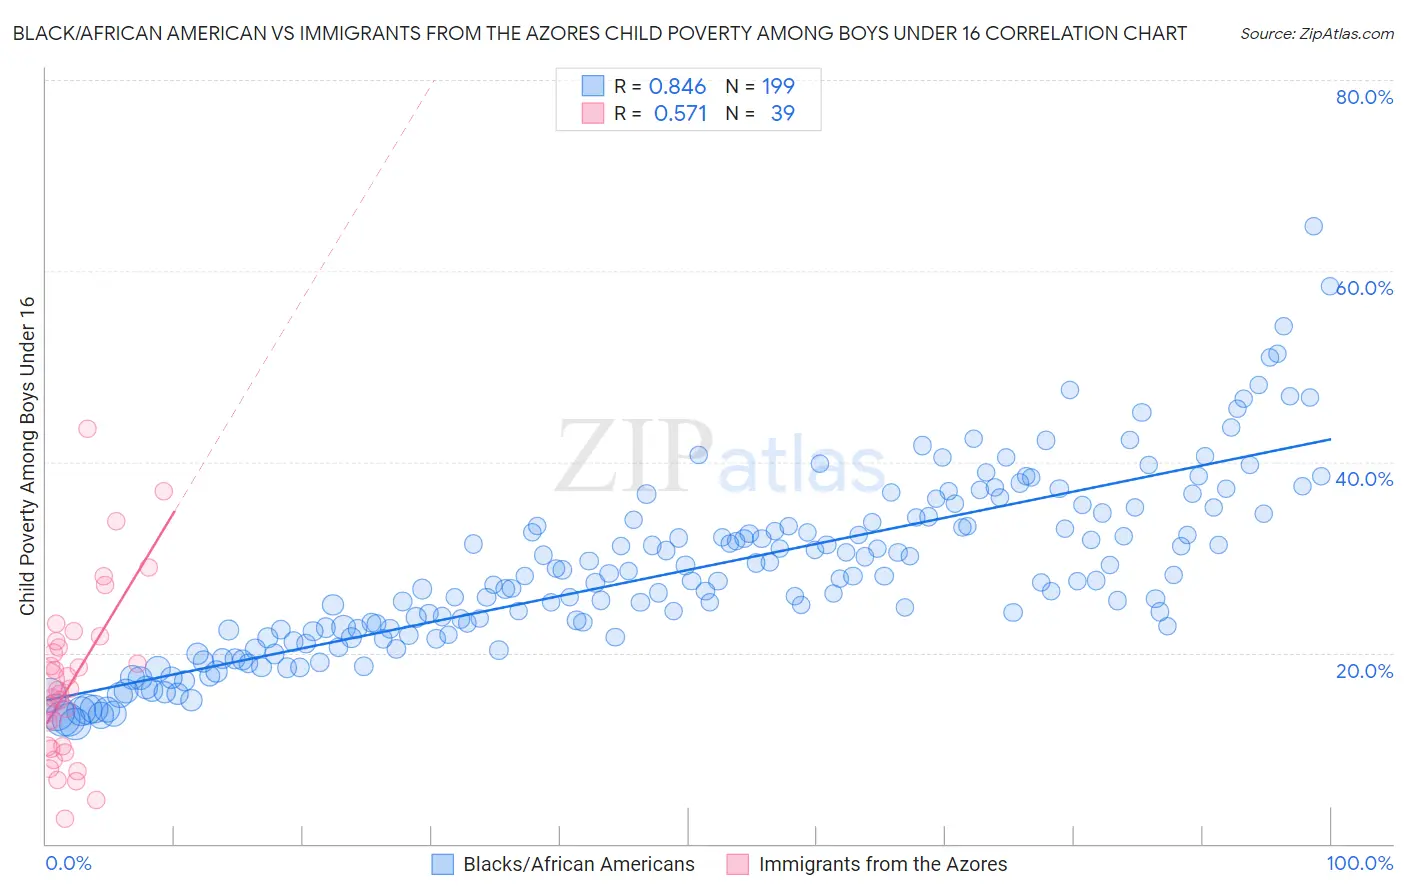 Black/African American vs Immigrants from the Azores Child Poverty Among Boys Under 16